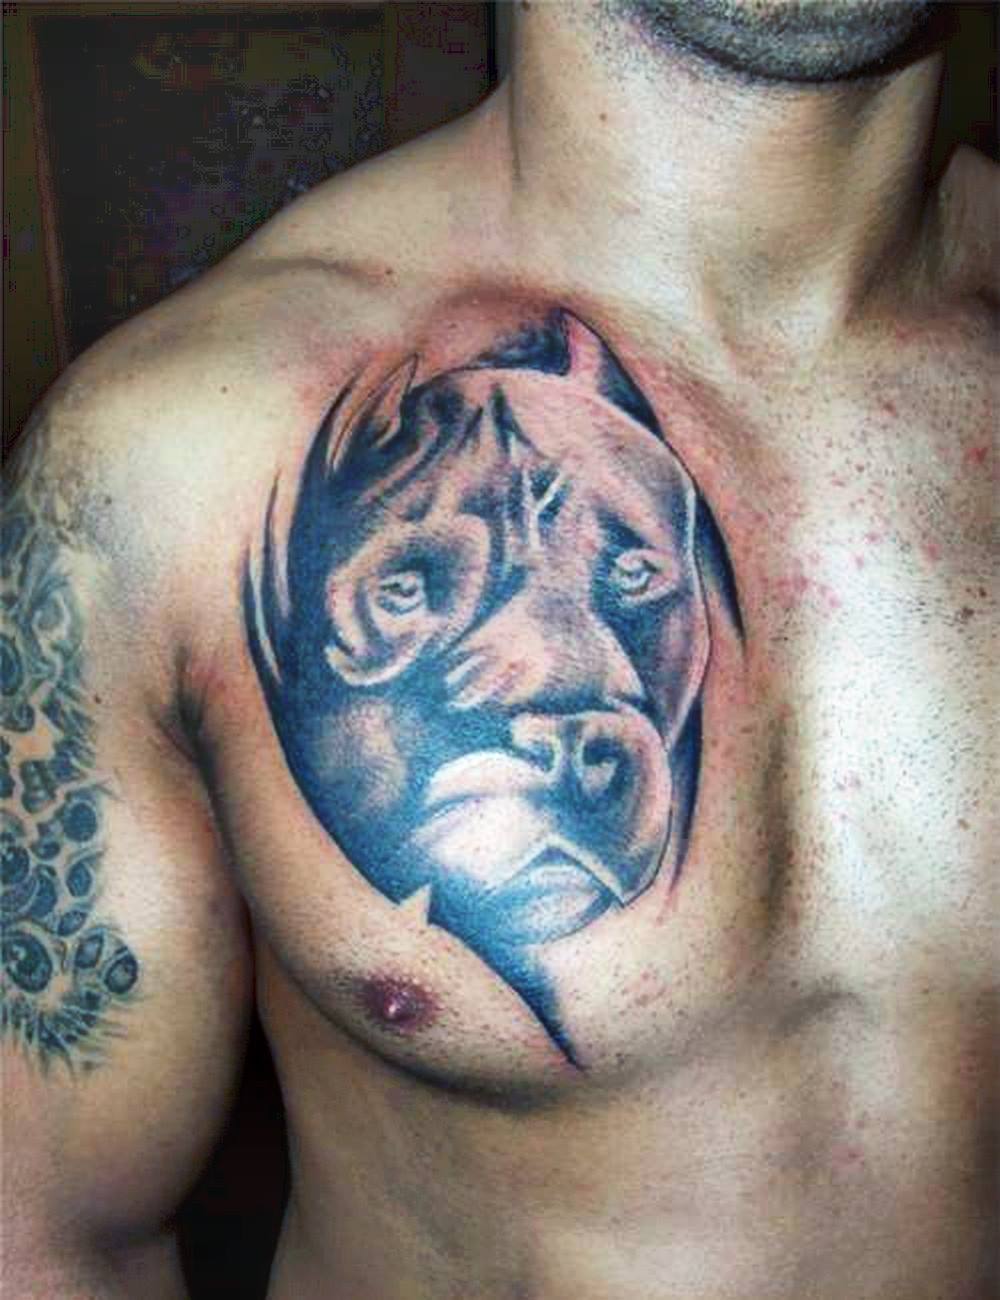 This concerned dog is wondering why its owner thought this tattoo was a good idea.